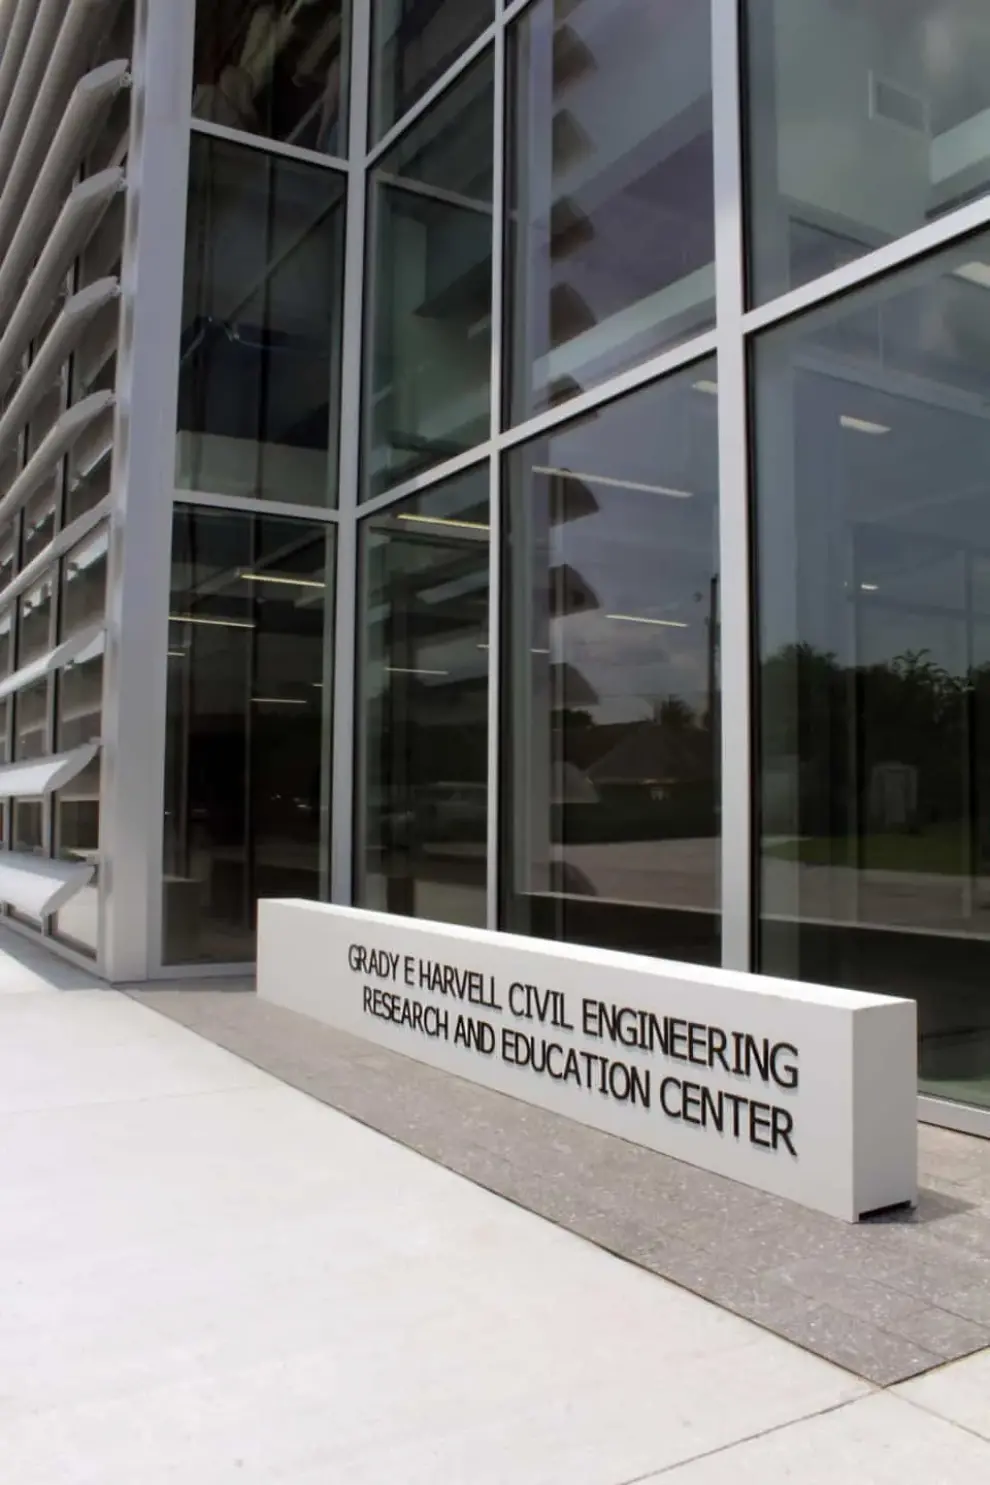 New Facility Provides Opportunity for Students and Researchers at the University of Arkansas